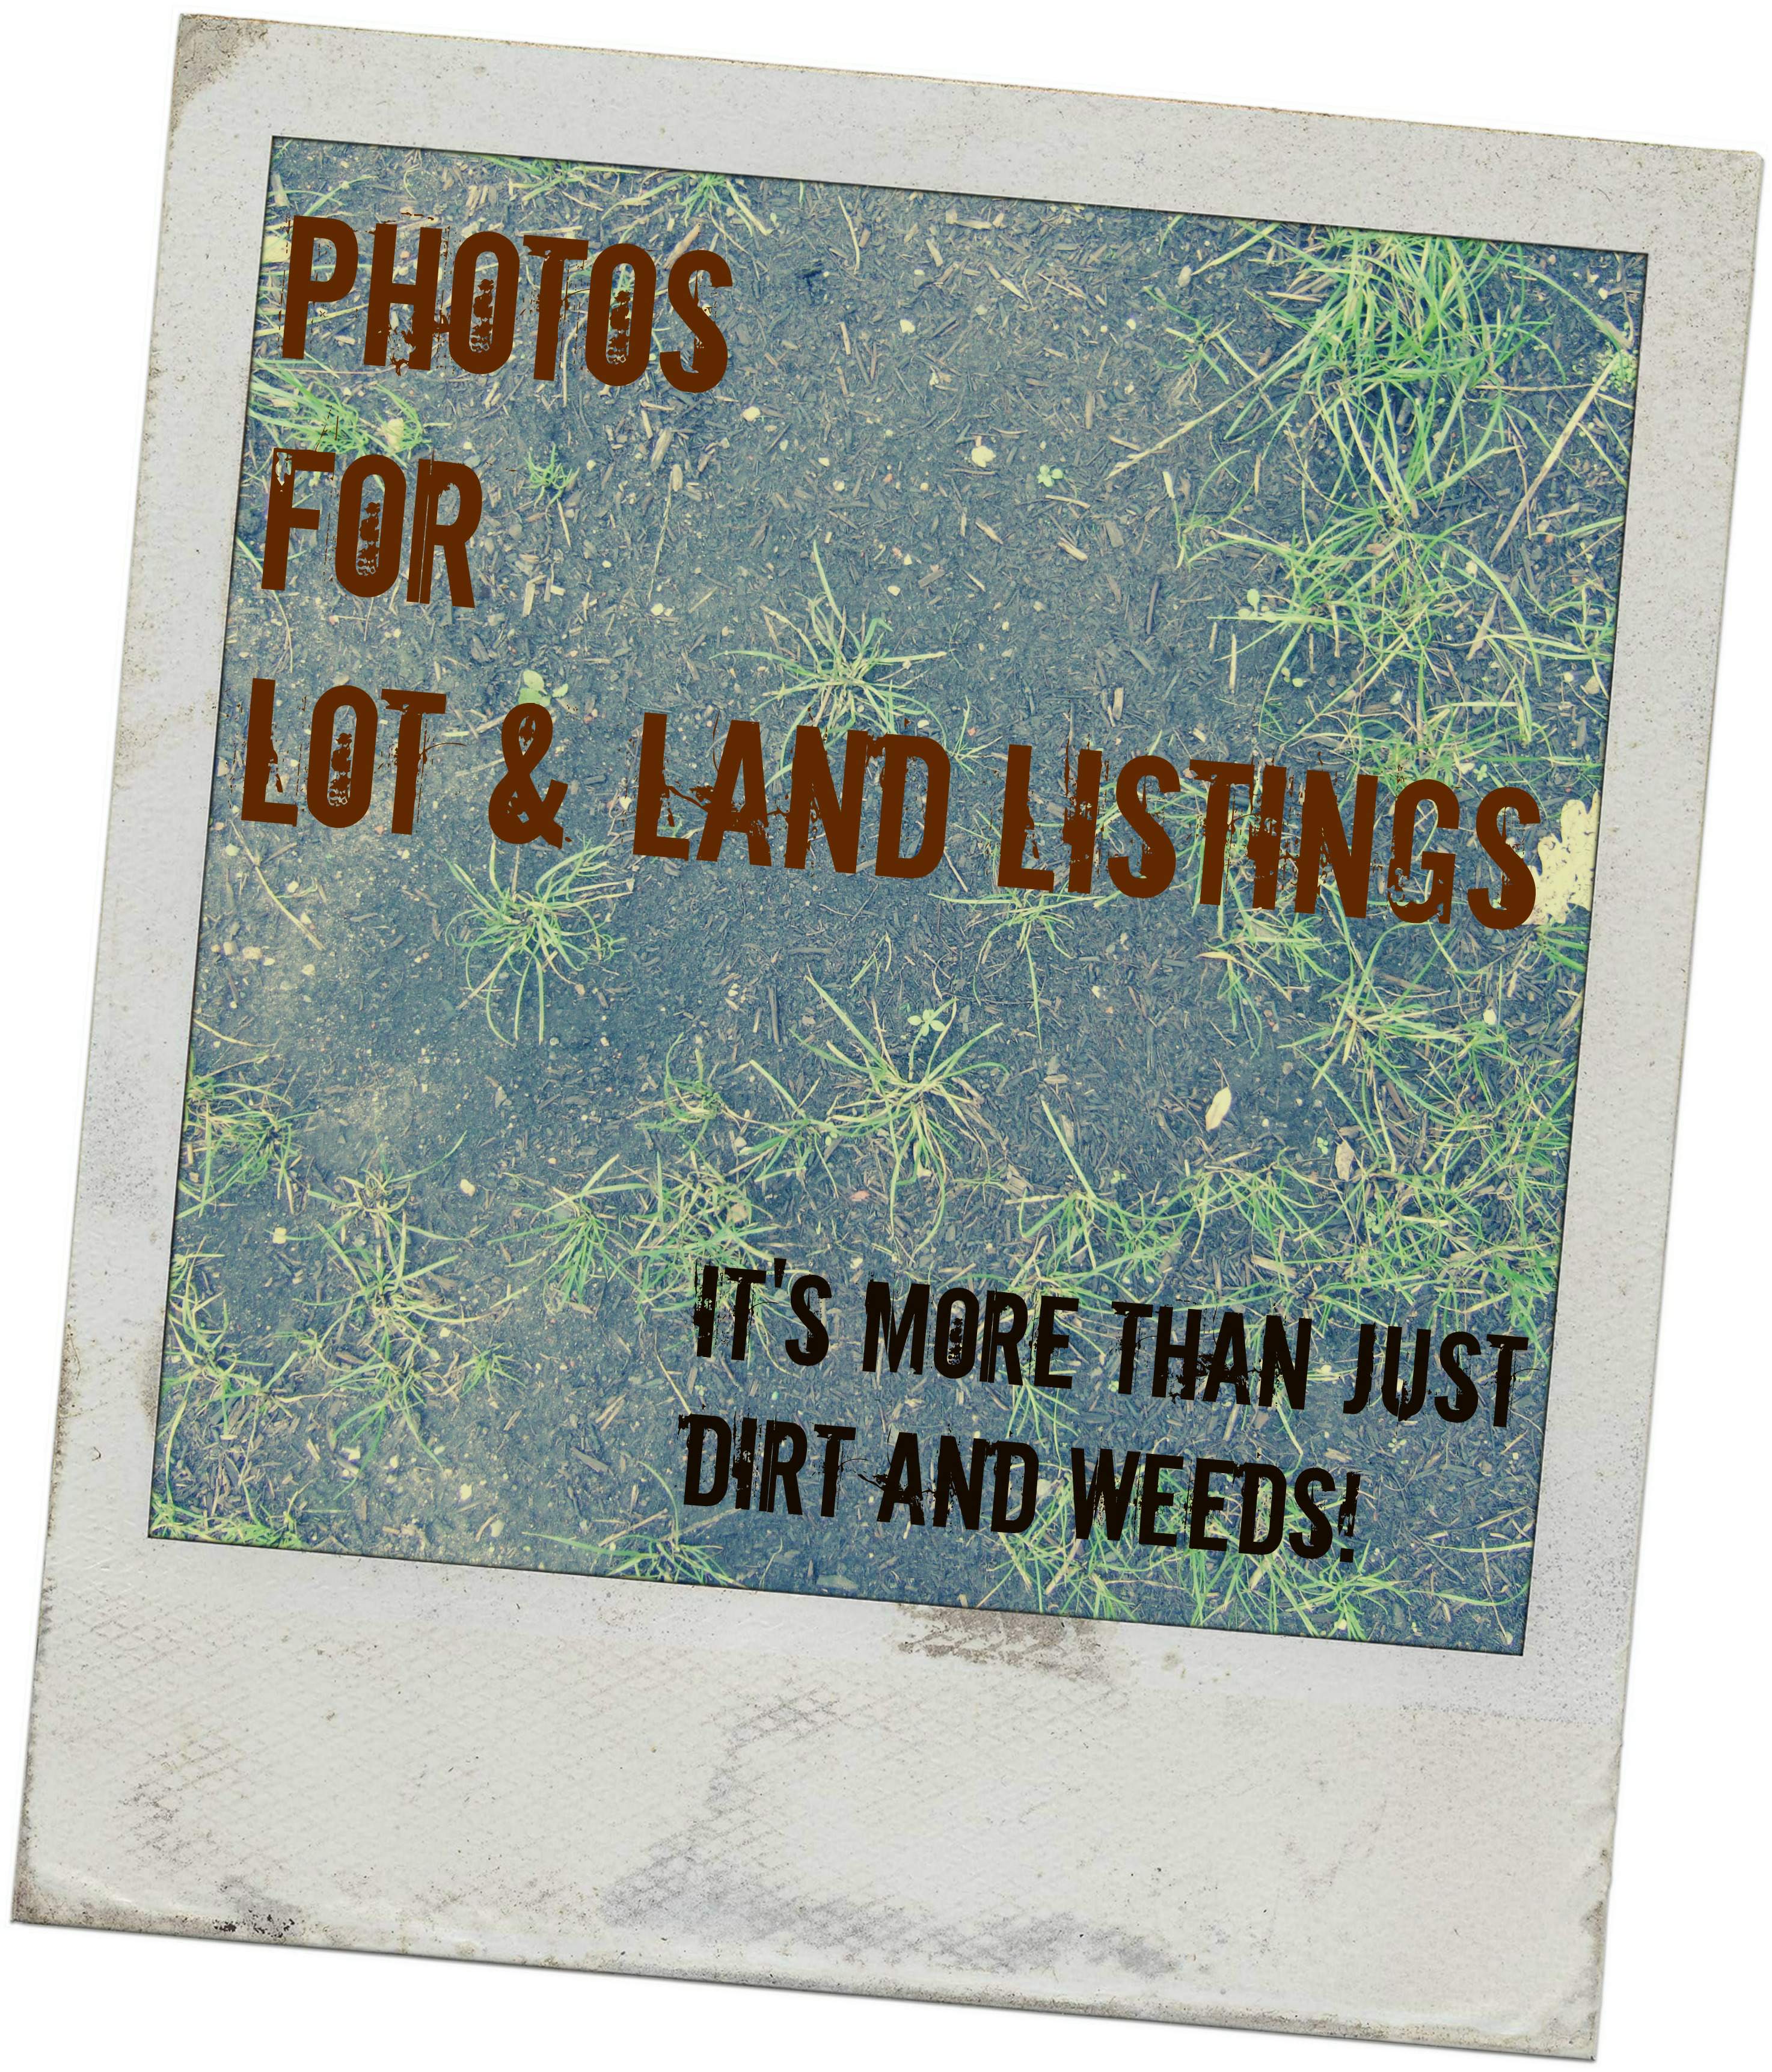 Photo of land and weeds with words Photos for Lot & Land Listings: It's More Than Just Dirt and Weeds